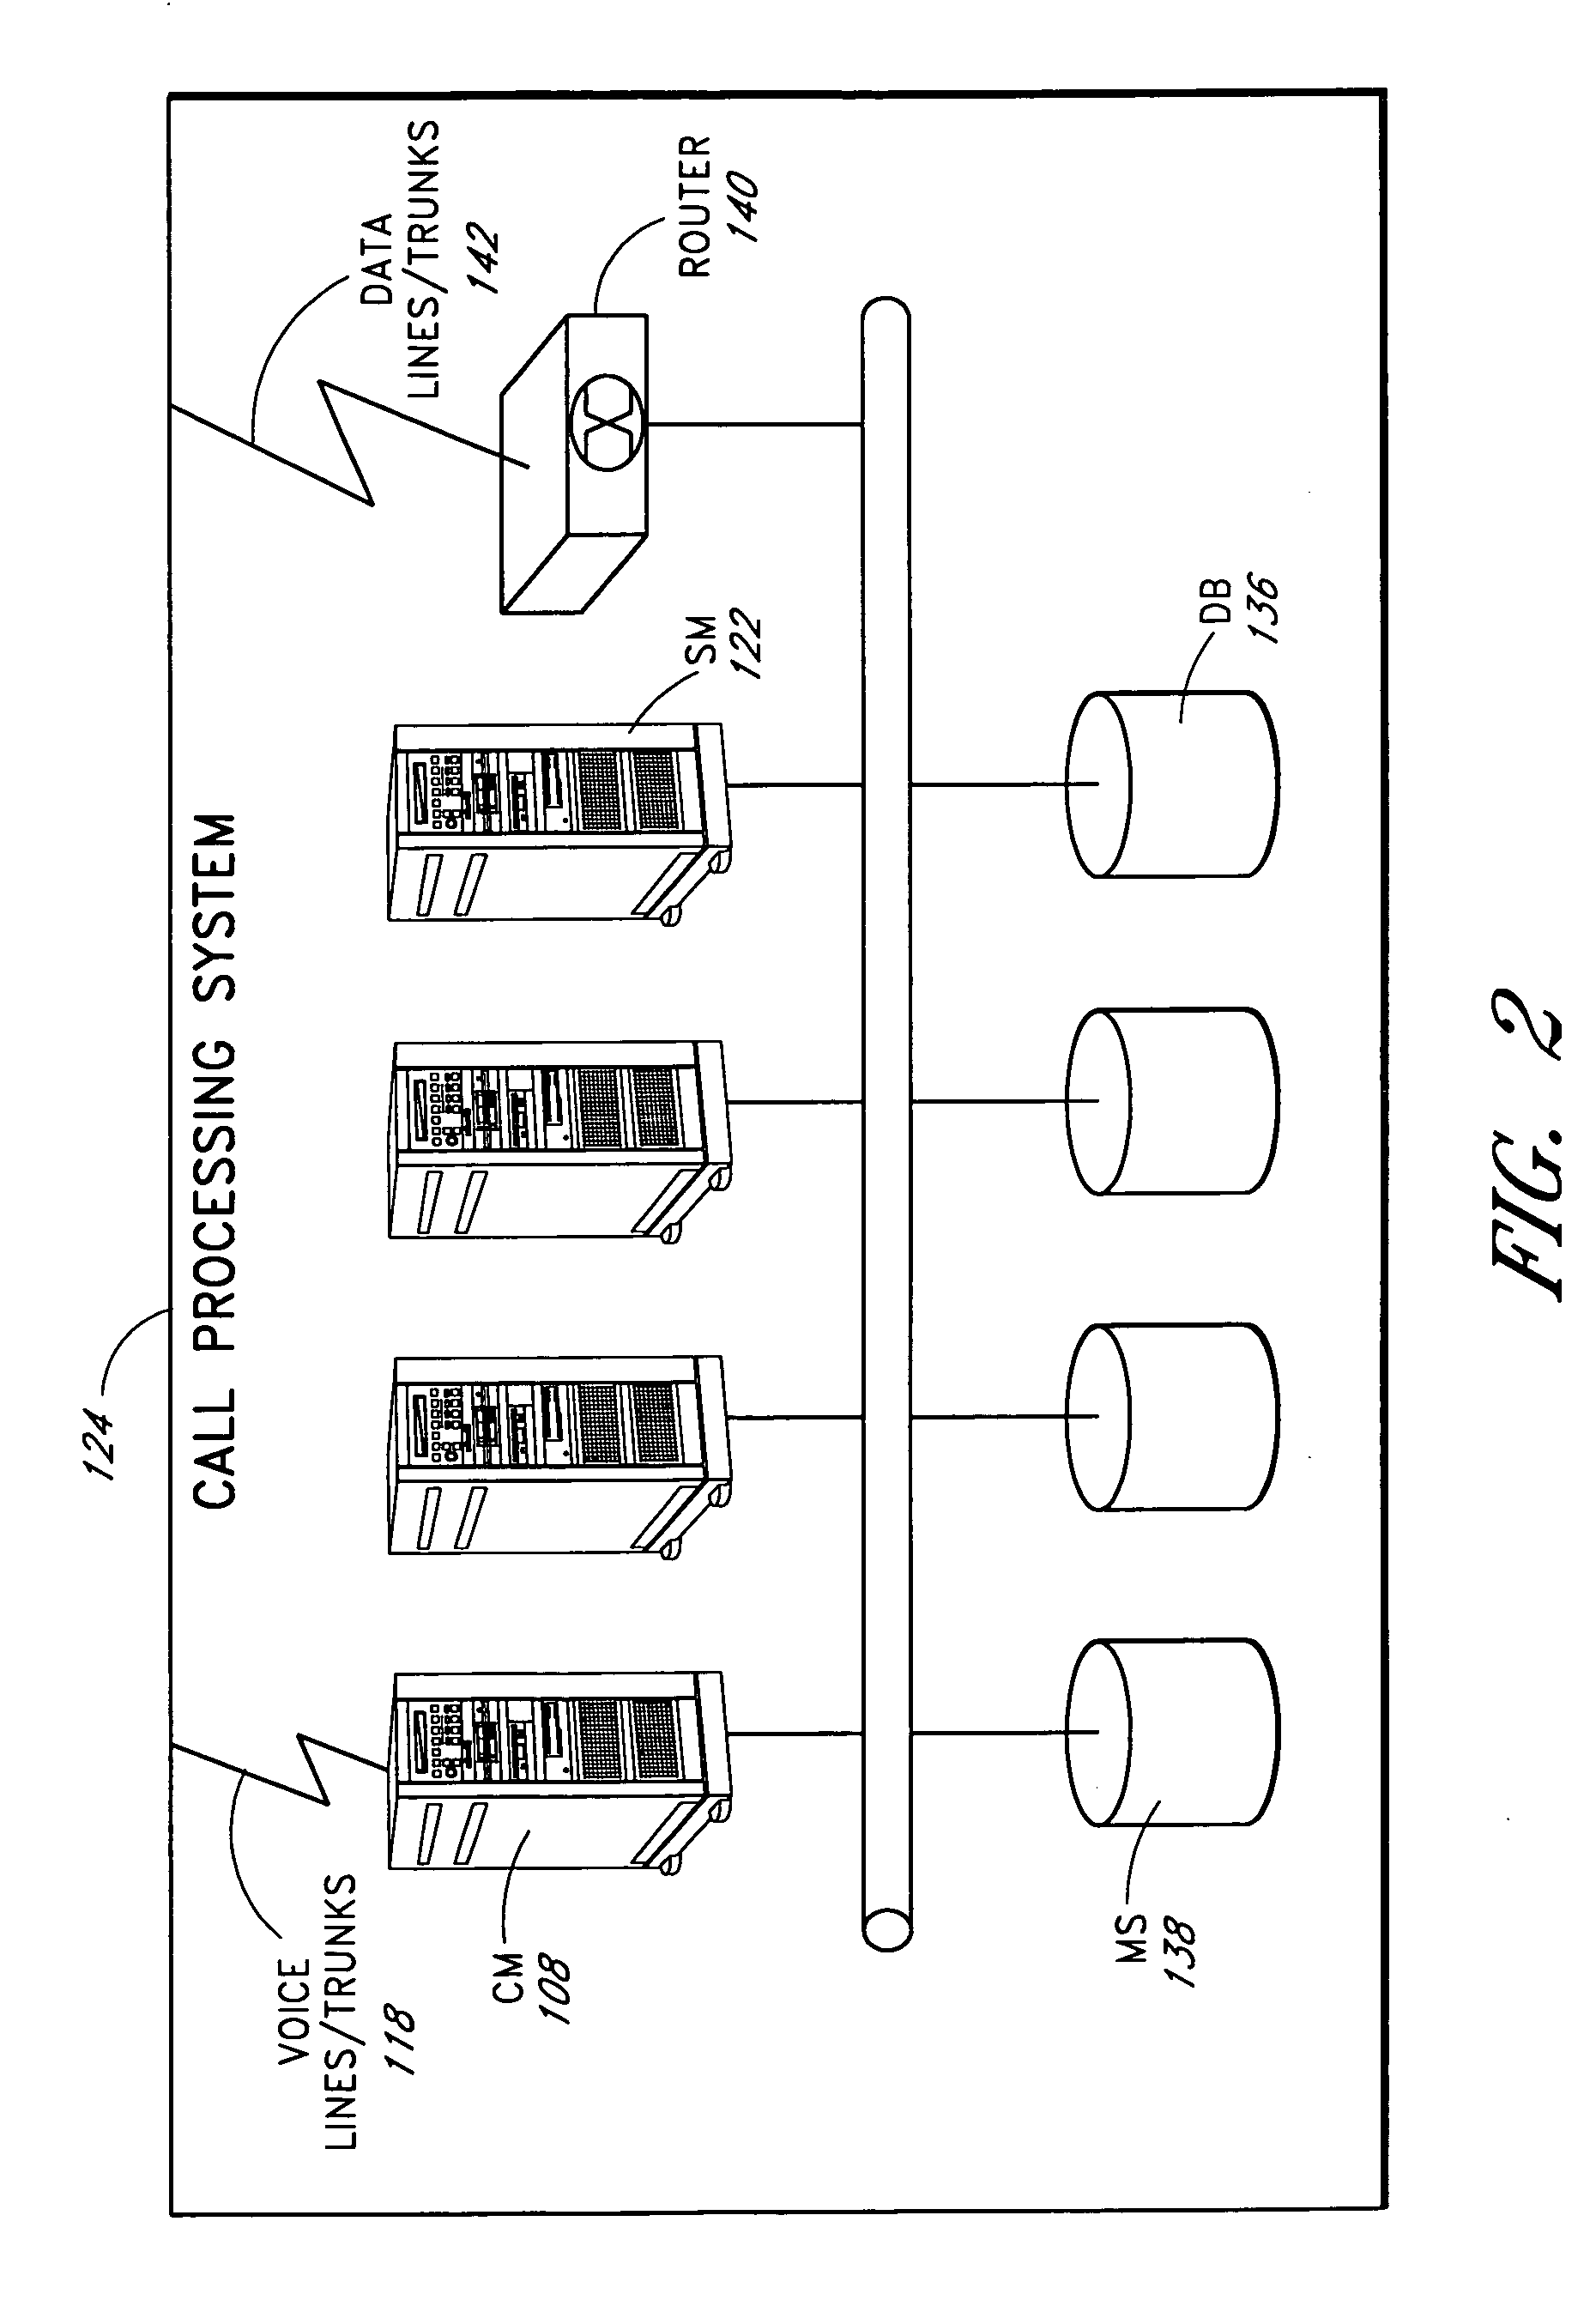 Methods and systems for telephony processing, including location based call transfers